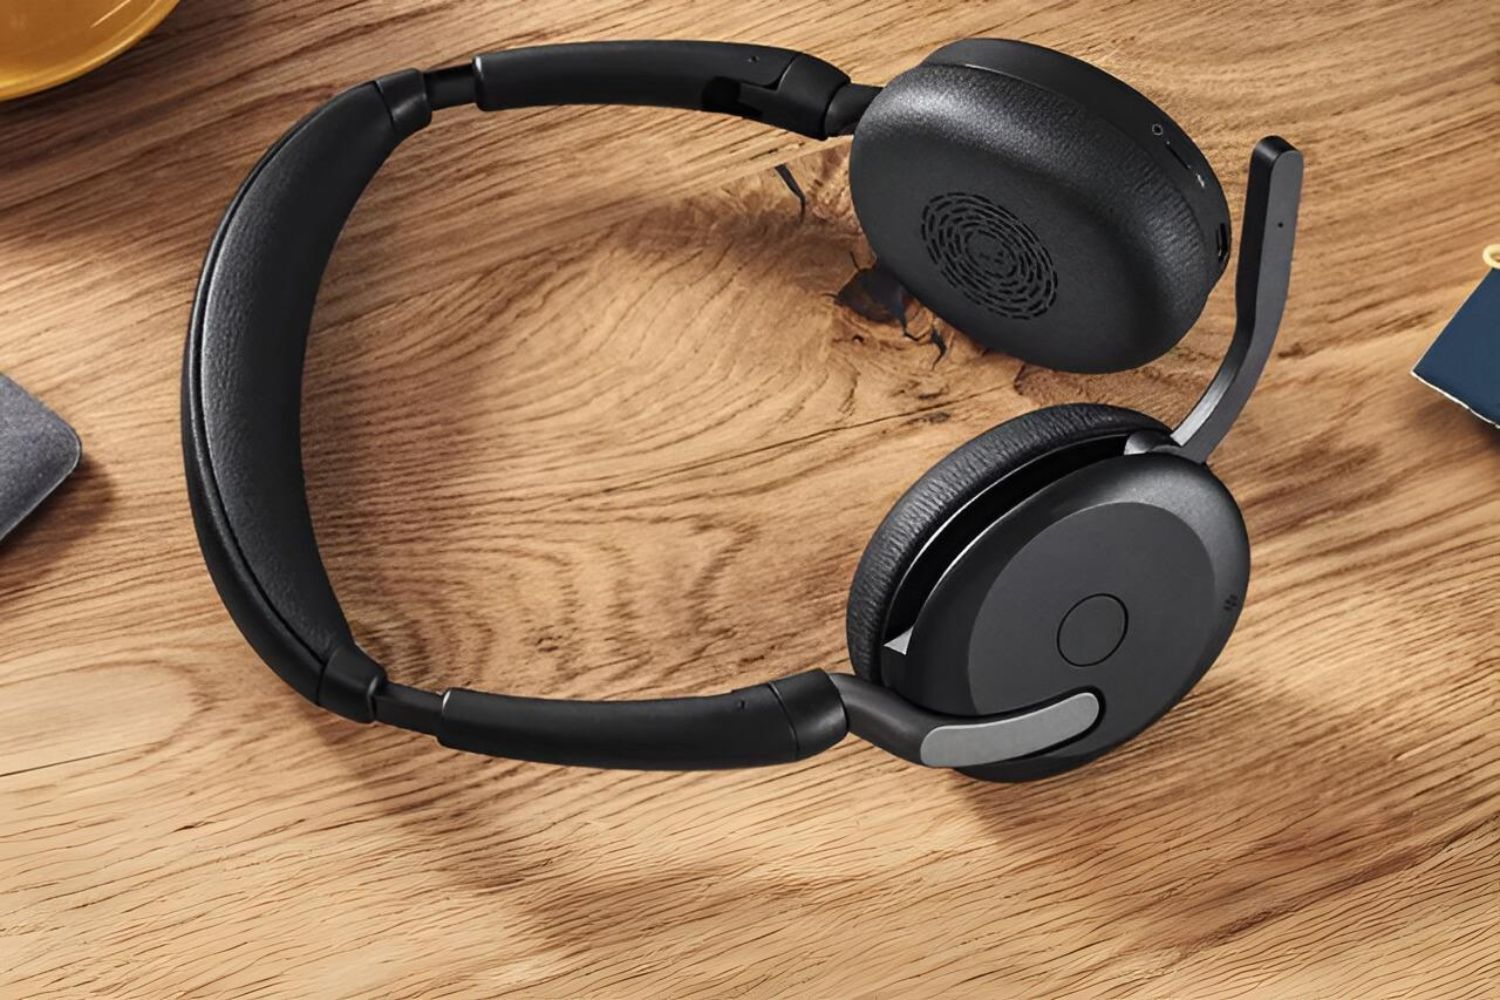 What Are The Best Wired Noise Cancelling Headphones For Office Environment